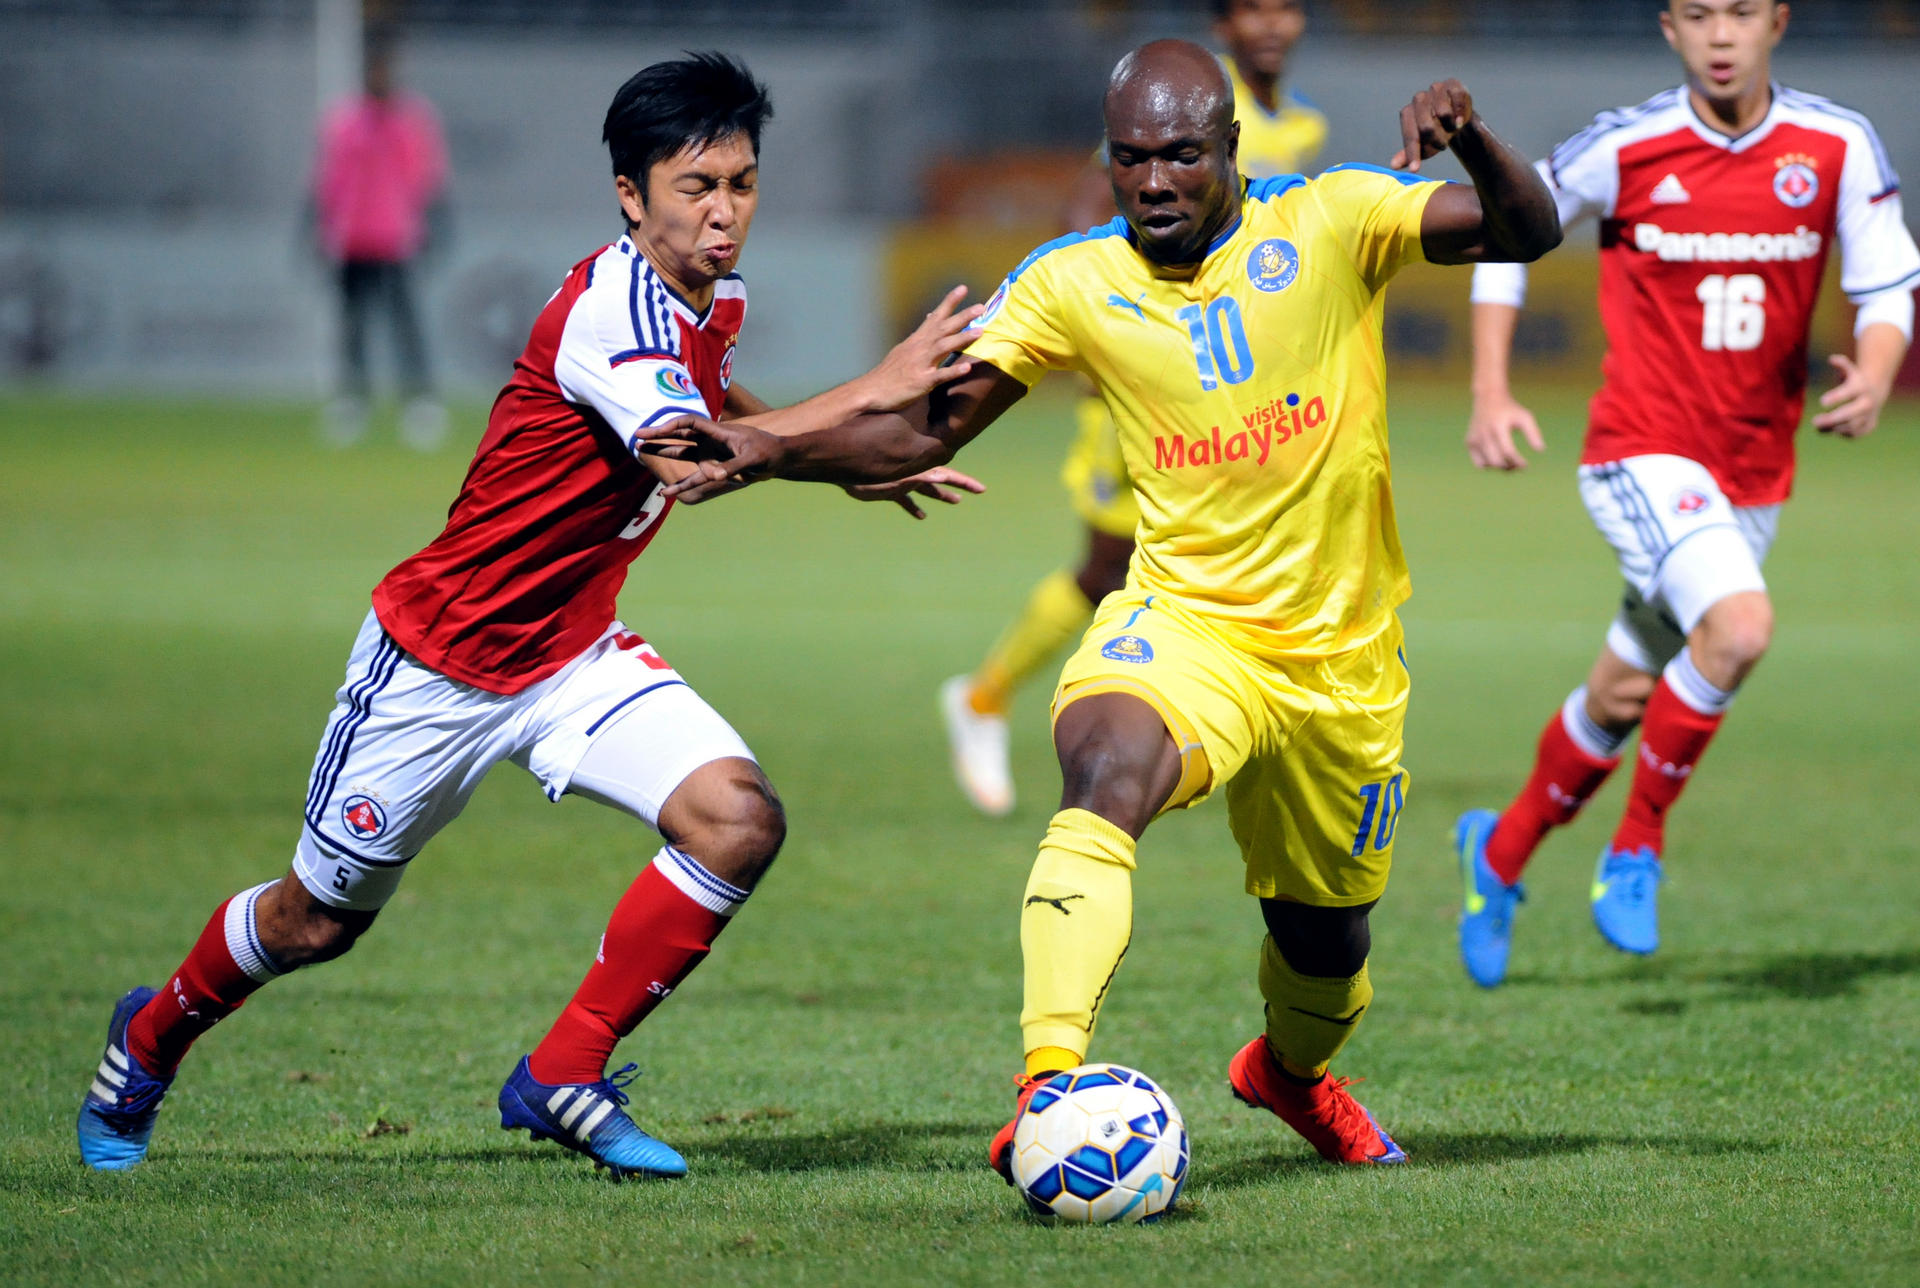 South China defender Chak Ting-fung tries to shut down Pahang's Dickson Nwakaeme in their AFC Cup group clash. South China won 3-1. Photos: Xinhua